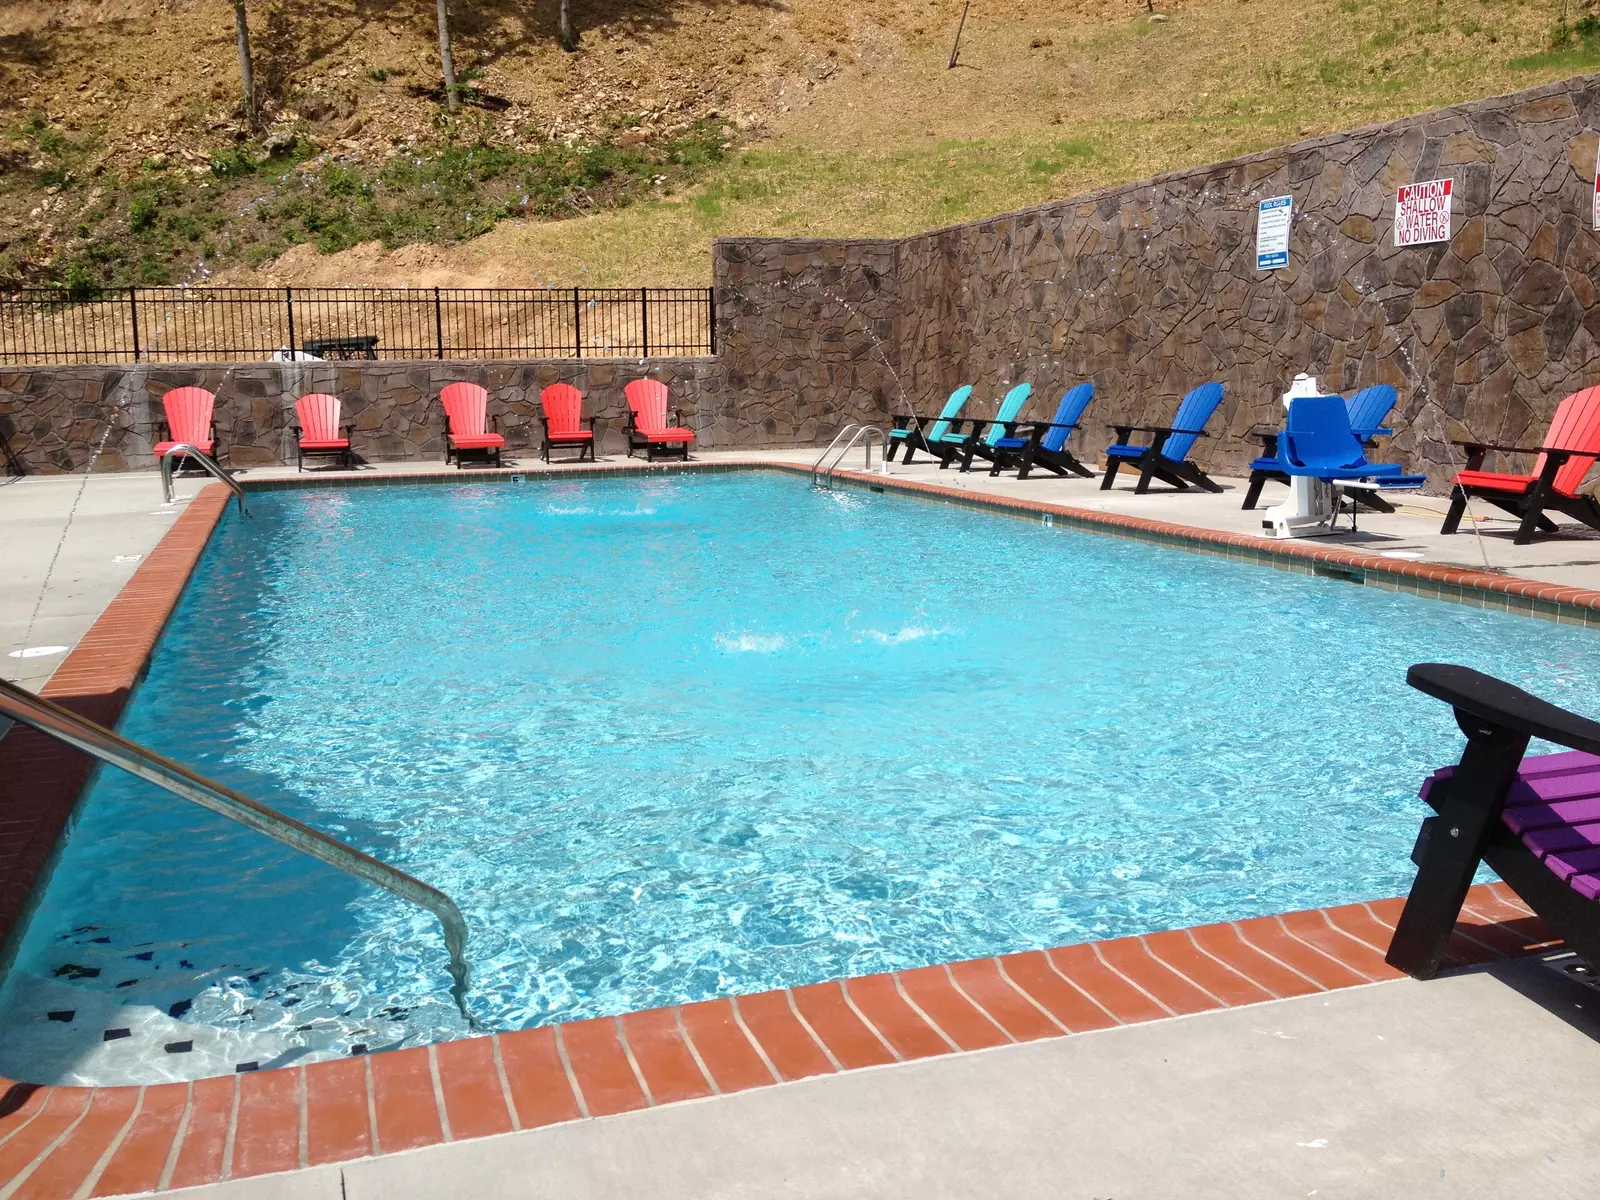 Outdoor Pool at the Wildbriar Resort near Pigeon Forge and Grand View Lodge